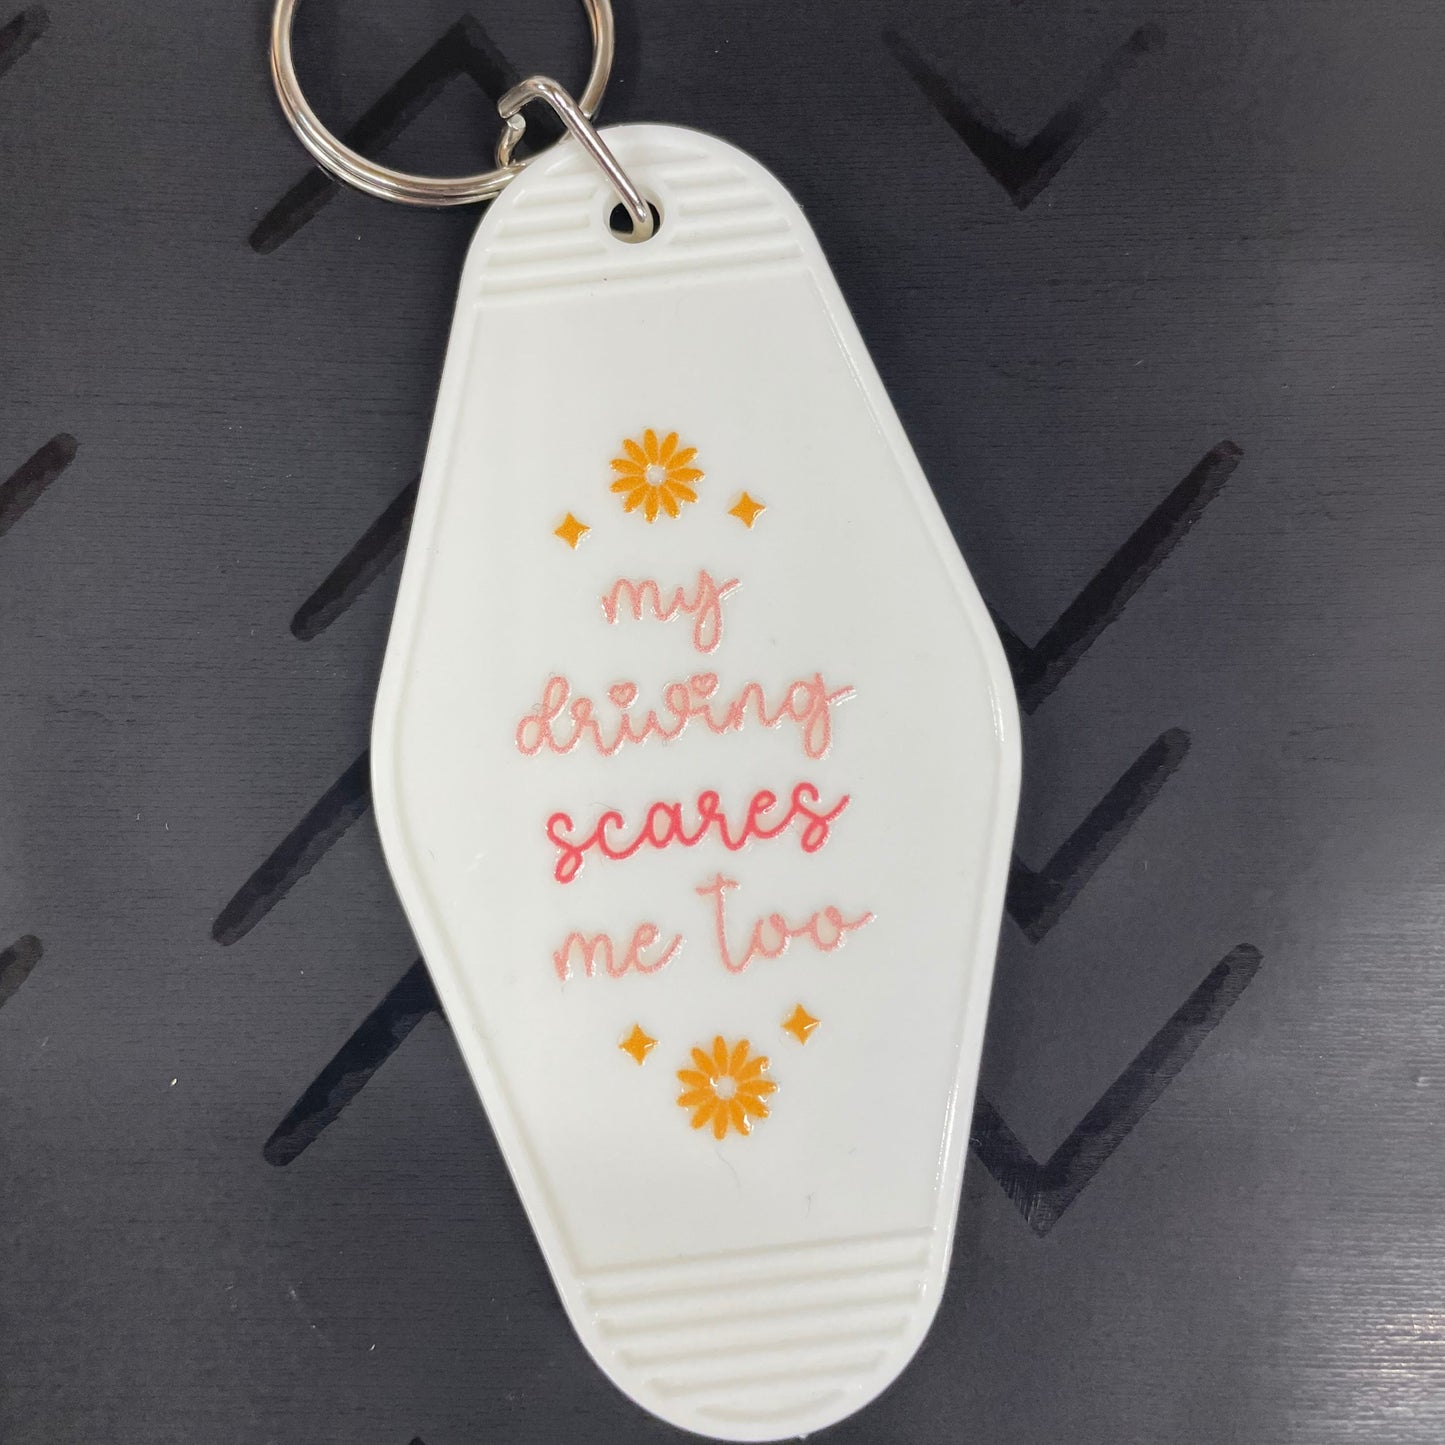 My Driving Scares Me Too Keychain